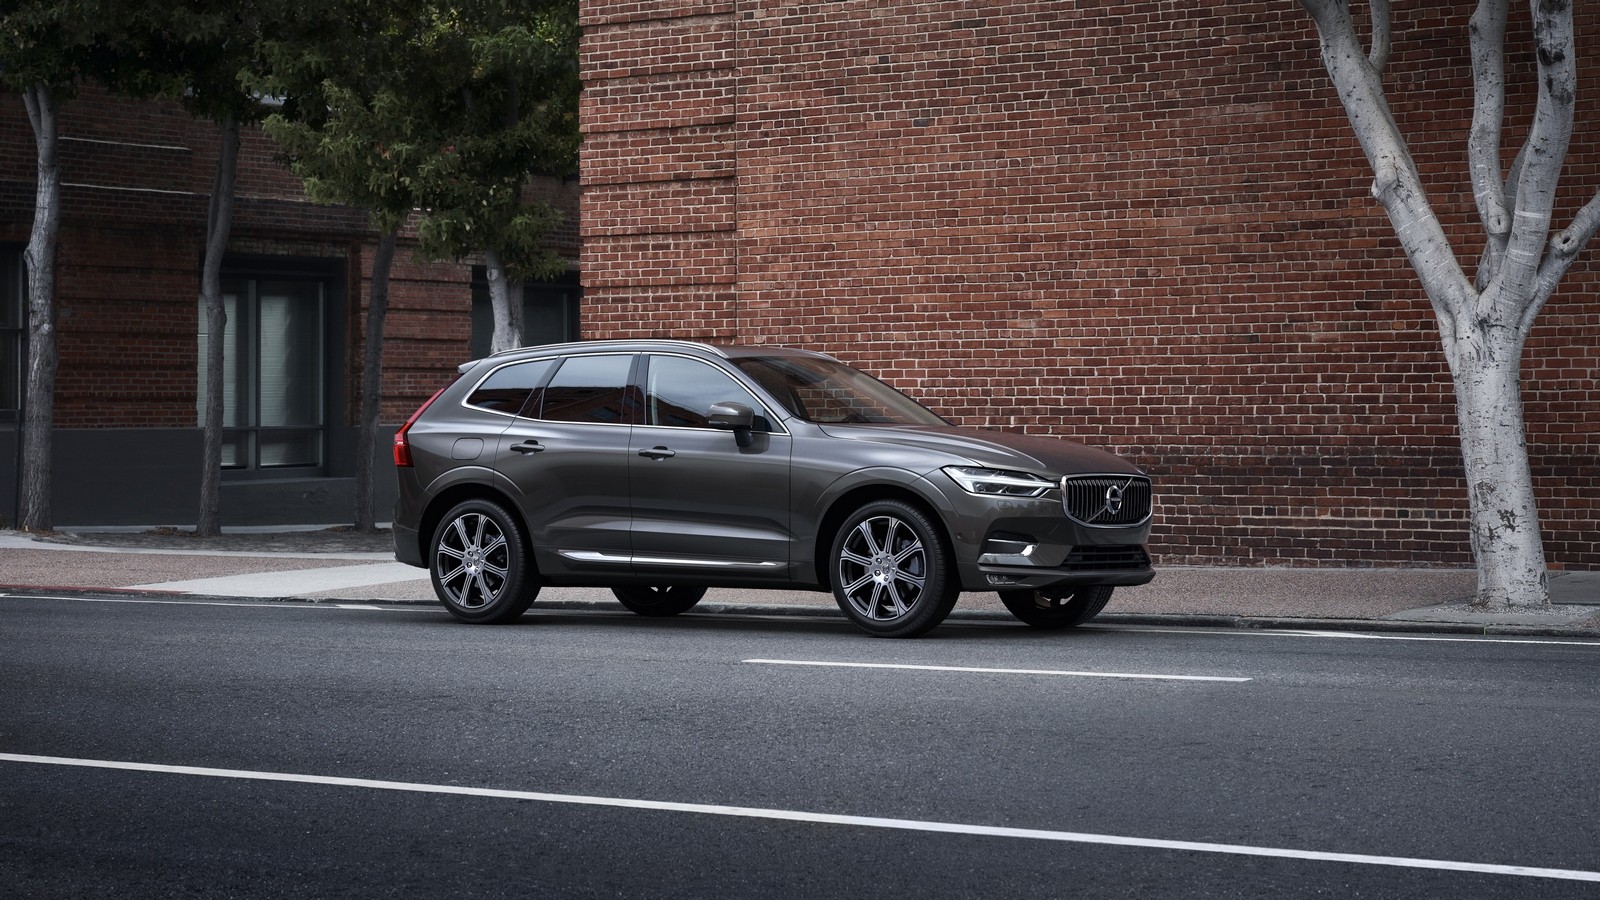 4_The new Volvo XC60 T6 Inscription in Pine Grey